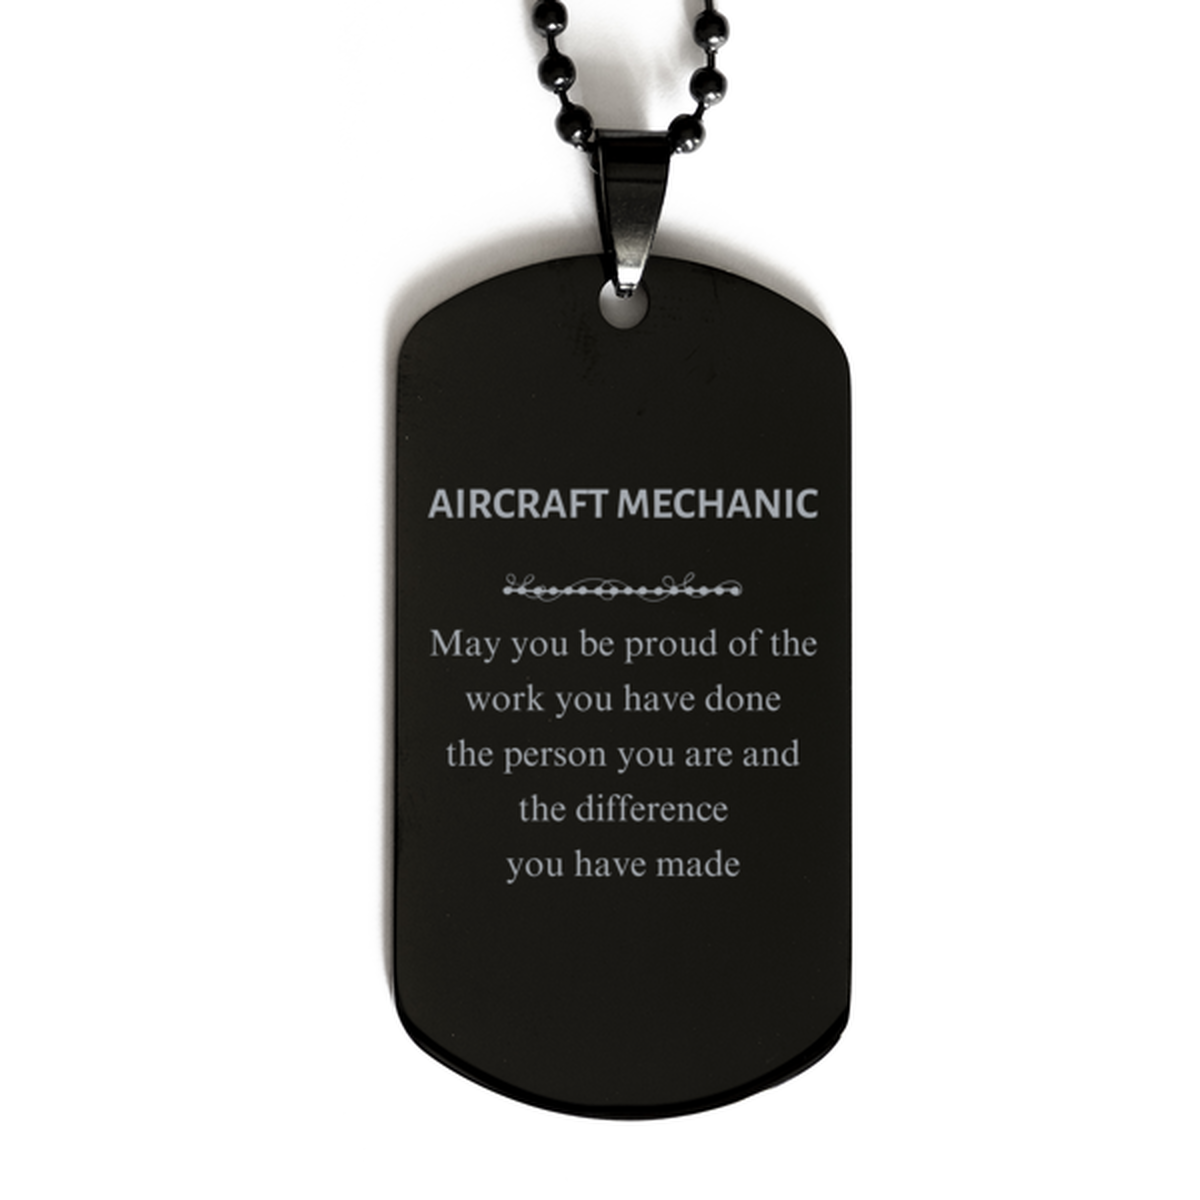 Aircraft Mechanic May you be proud of the work you have done, Retirement Aircraft Mechanic Black Dog Tag for Colleague Appreciation Gifts Amazing for Aircraft Mechanic